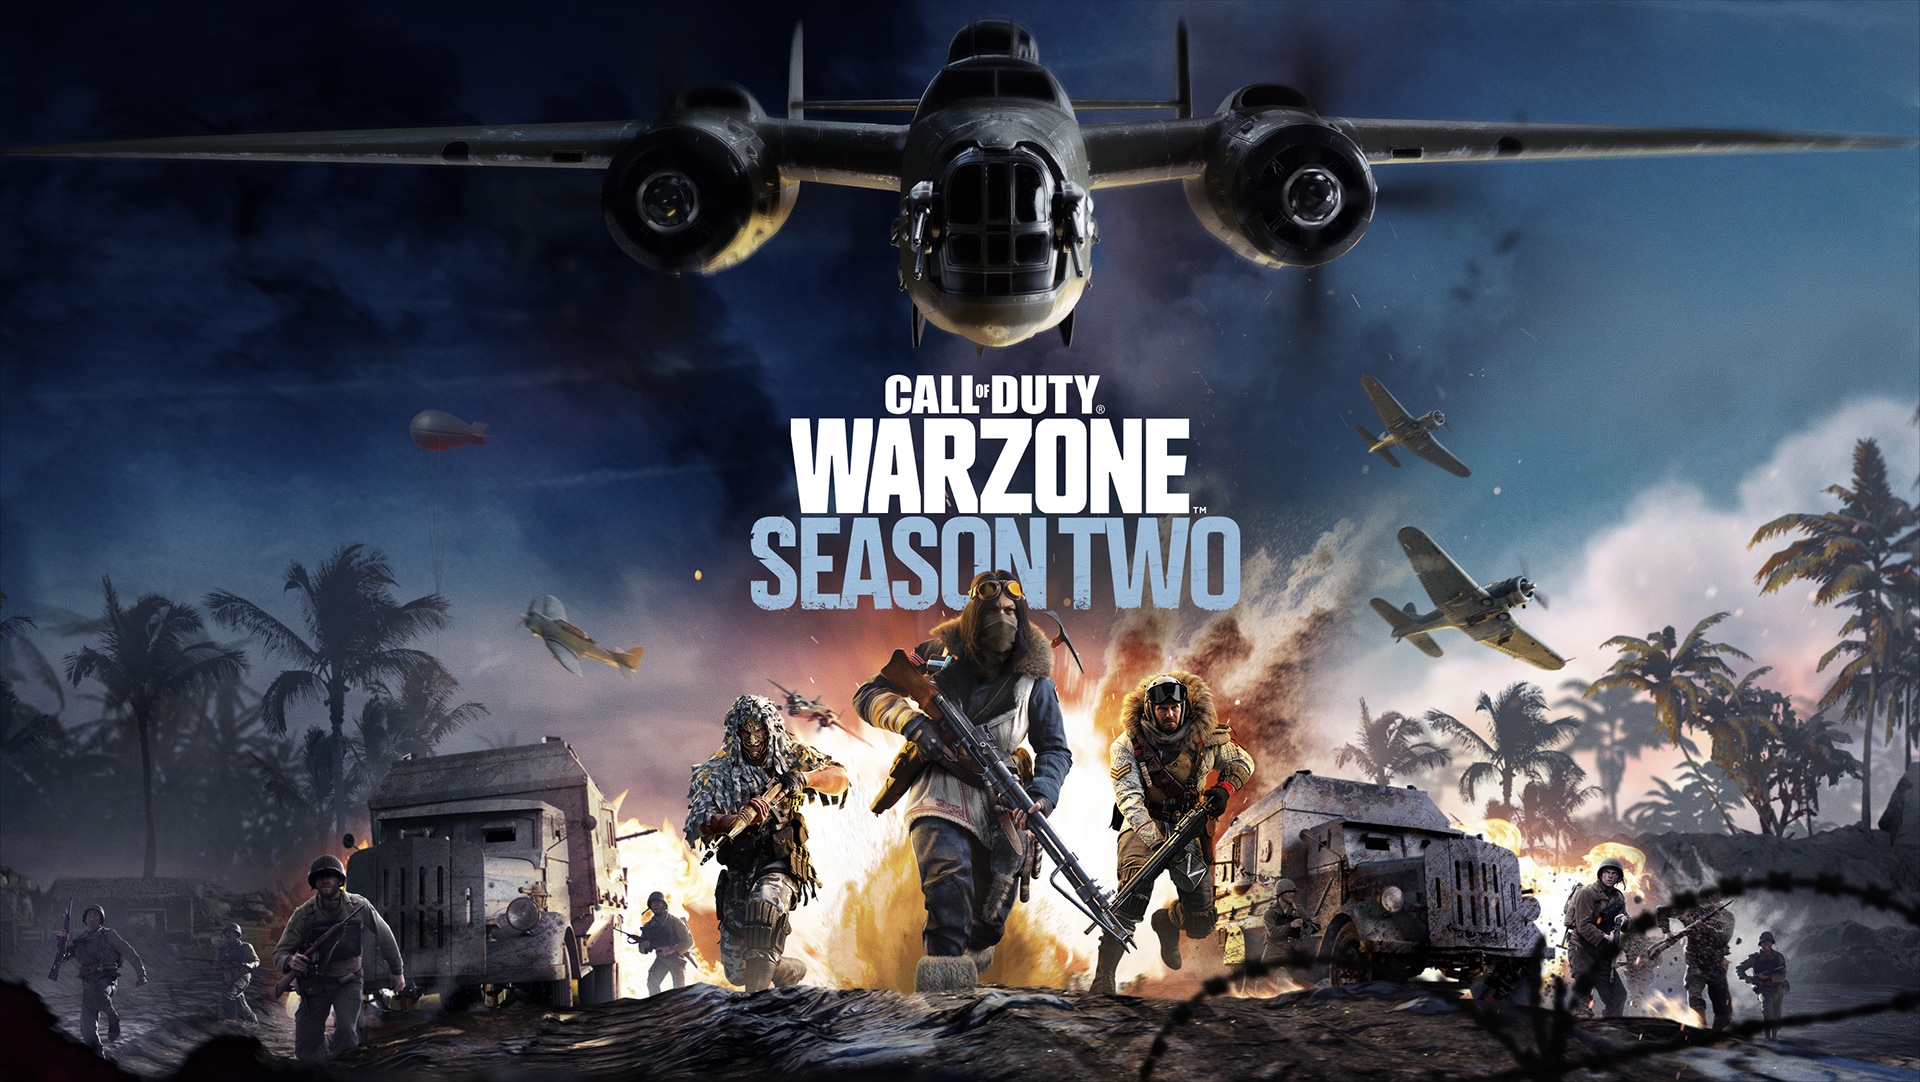 Ten Elite Strategies for Call of Duty®: Warzone™ Season Two’s New Areas and Mechanics